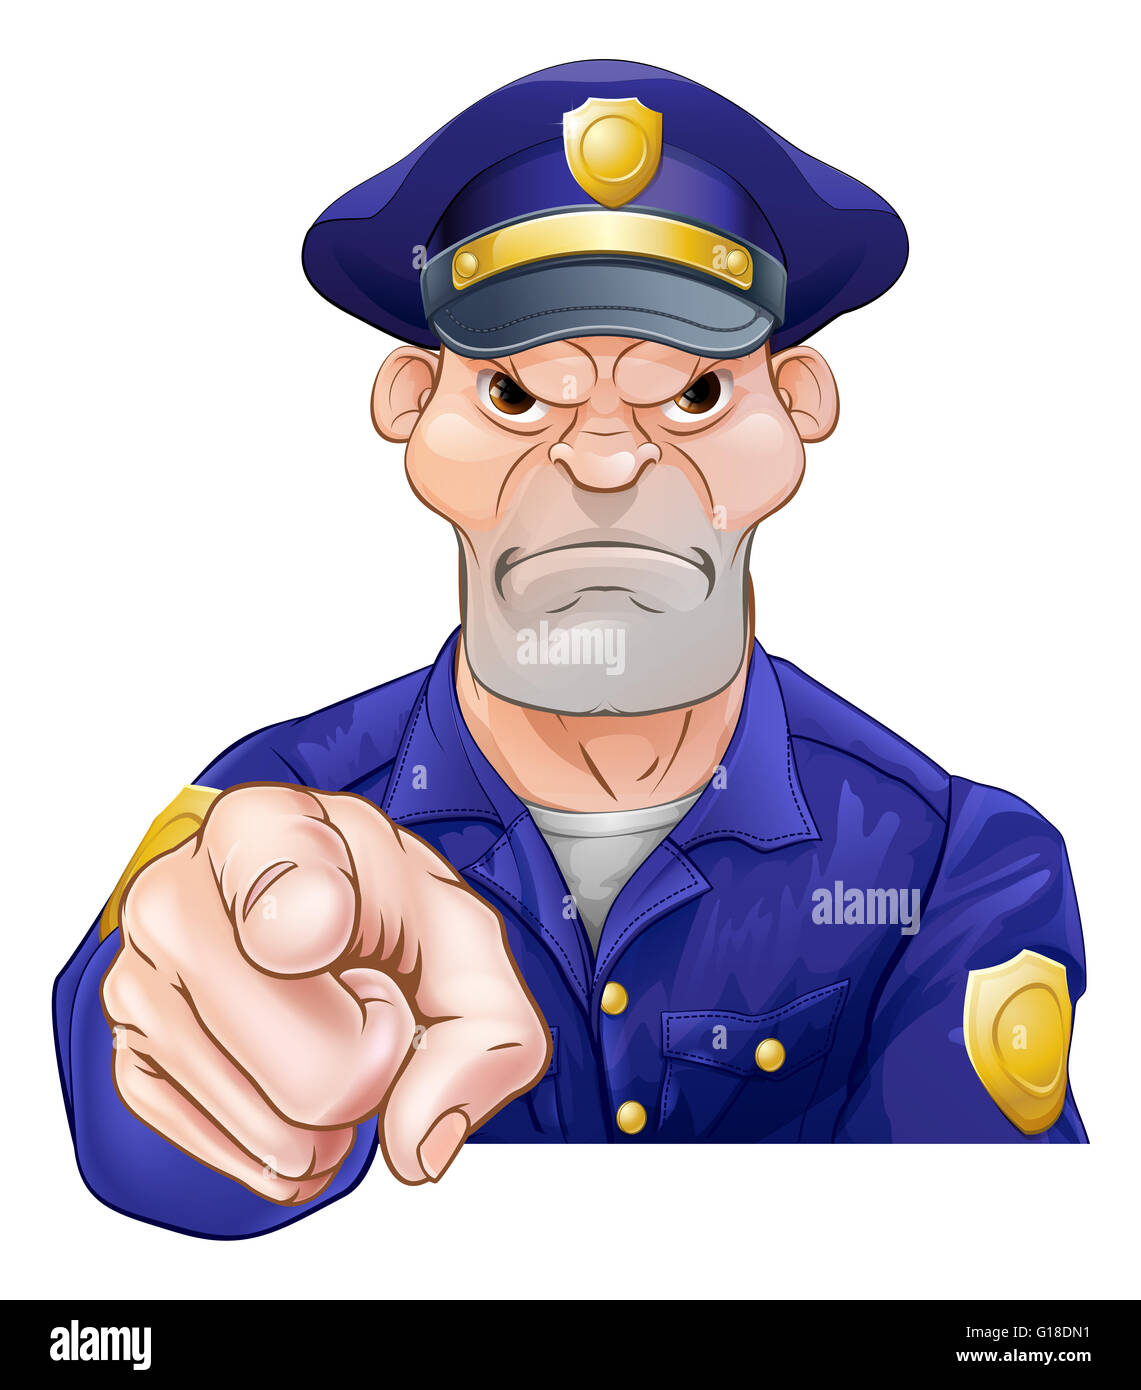 An angry looking cartoon police officer pointing Stock Photo